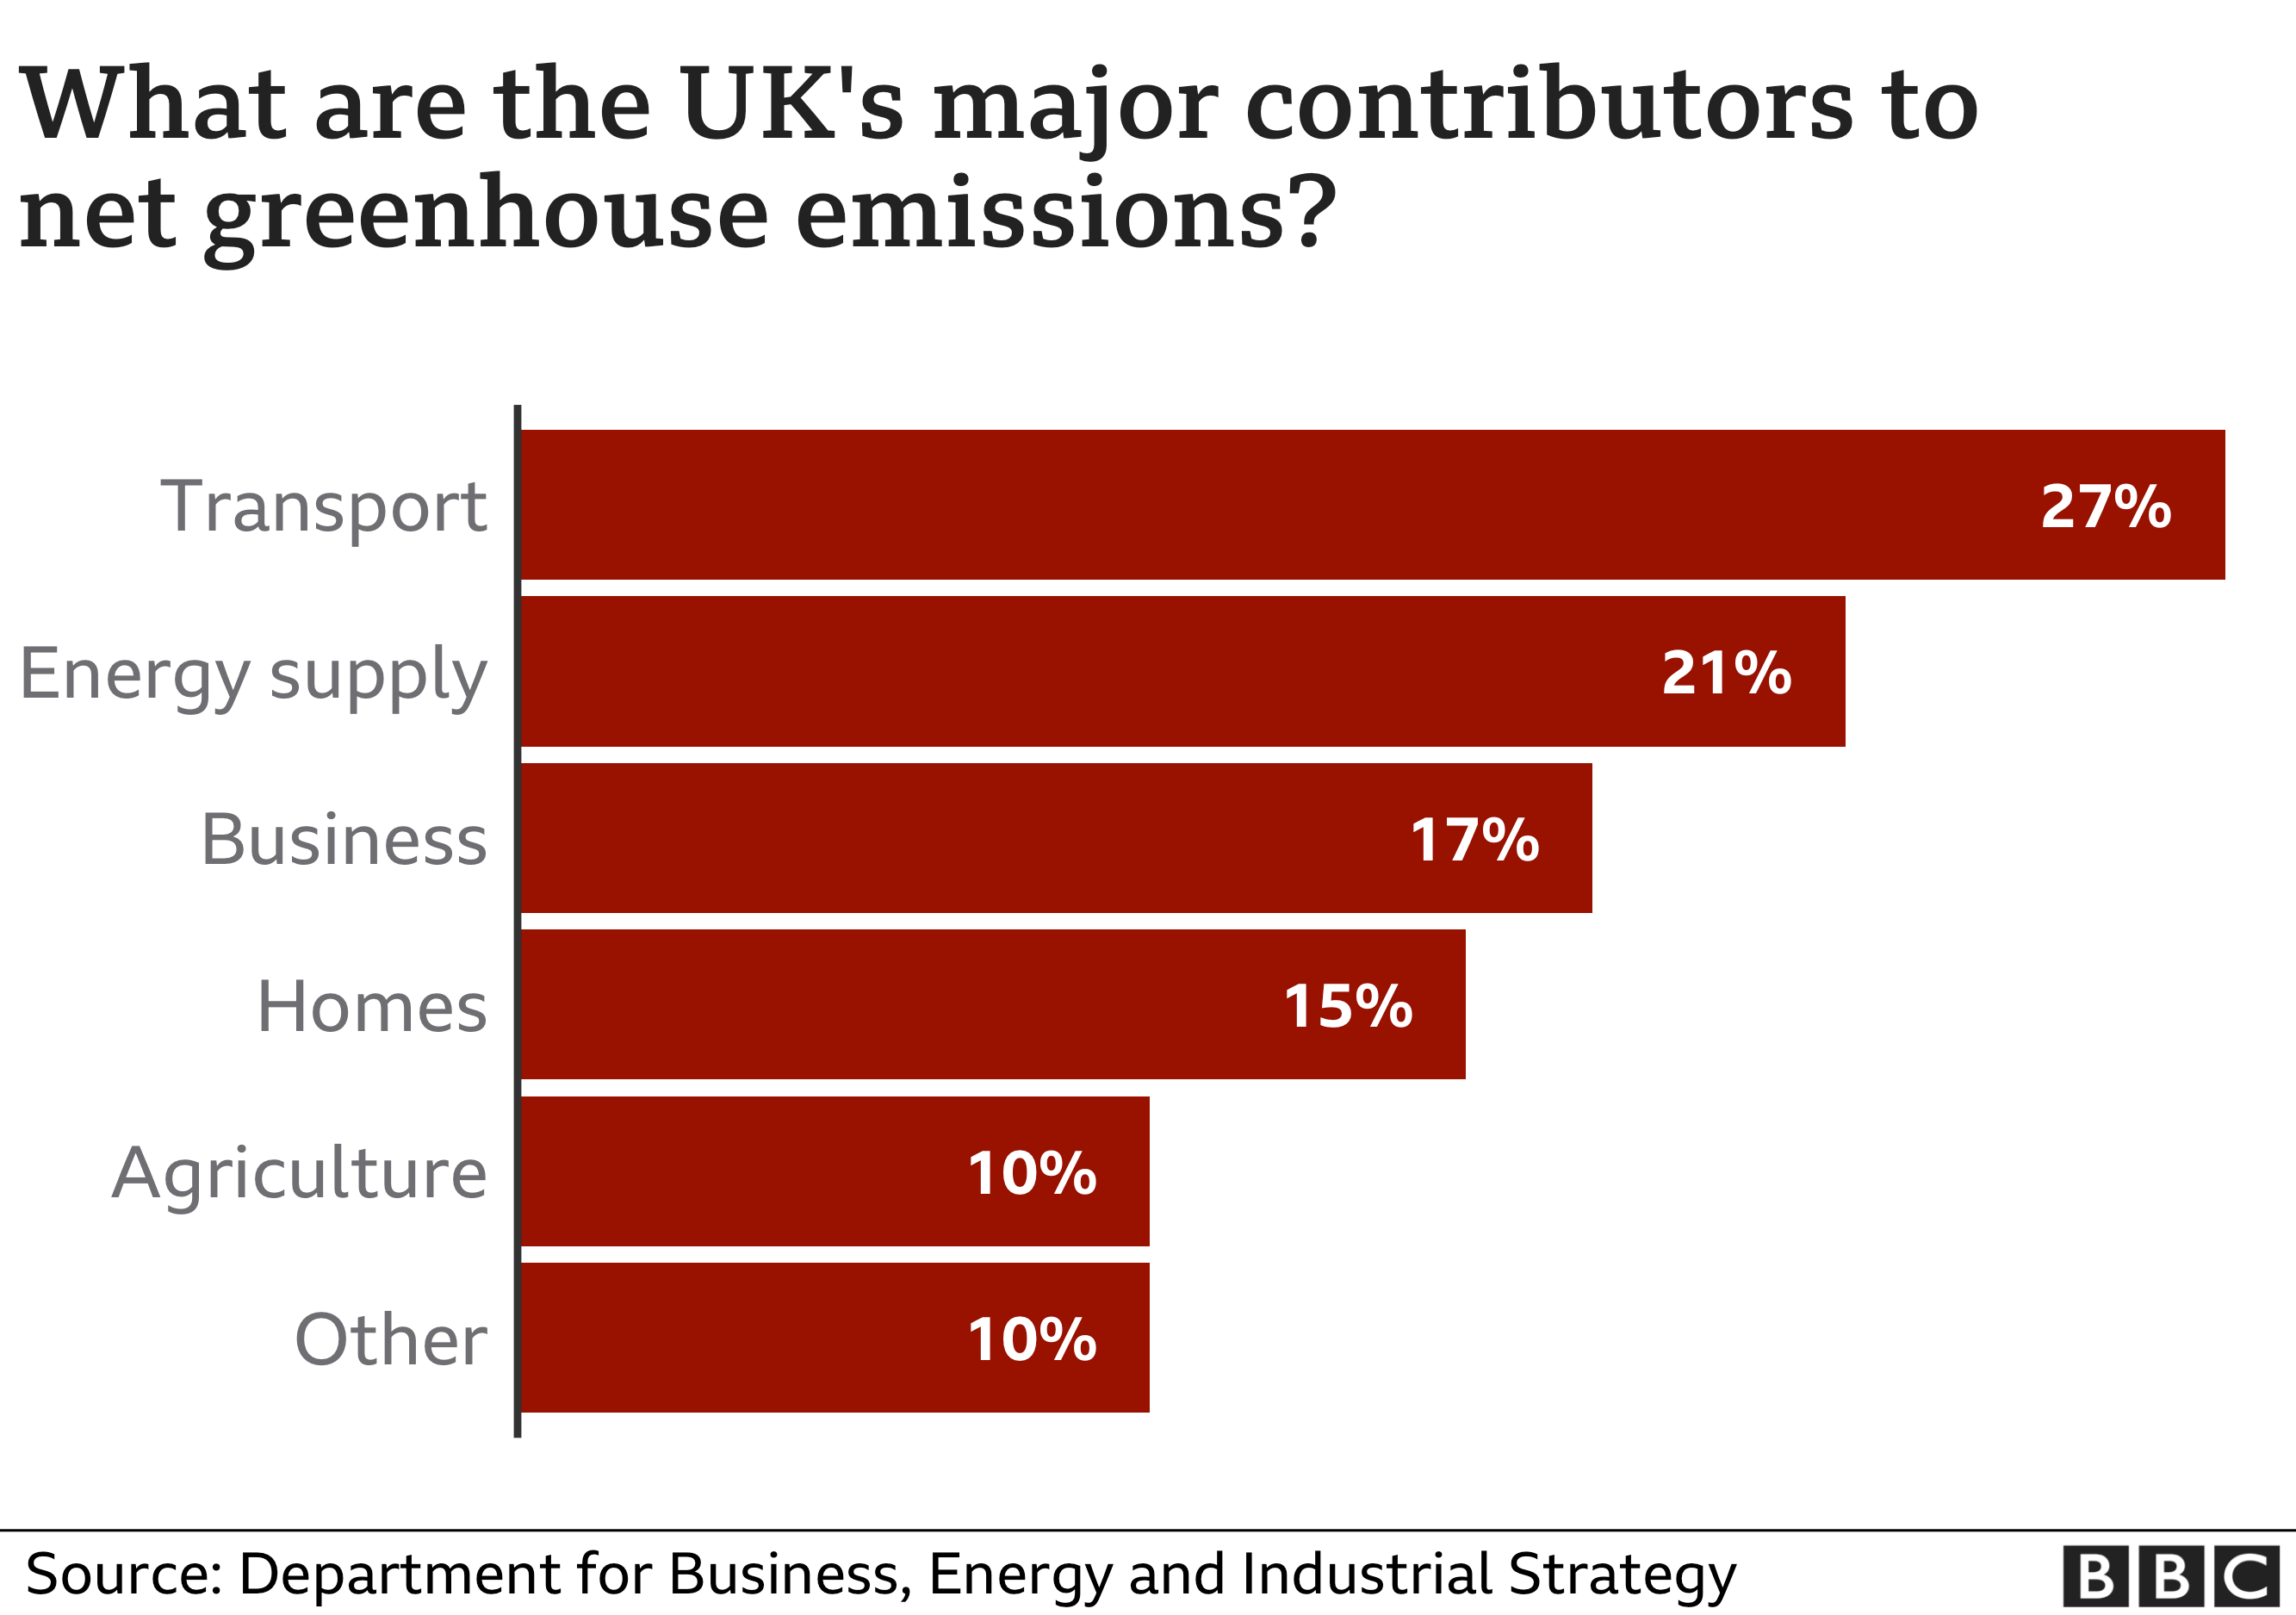 Chart showing major sources of greenhouse emissions in the UK